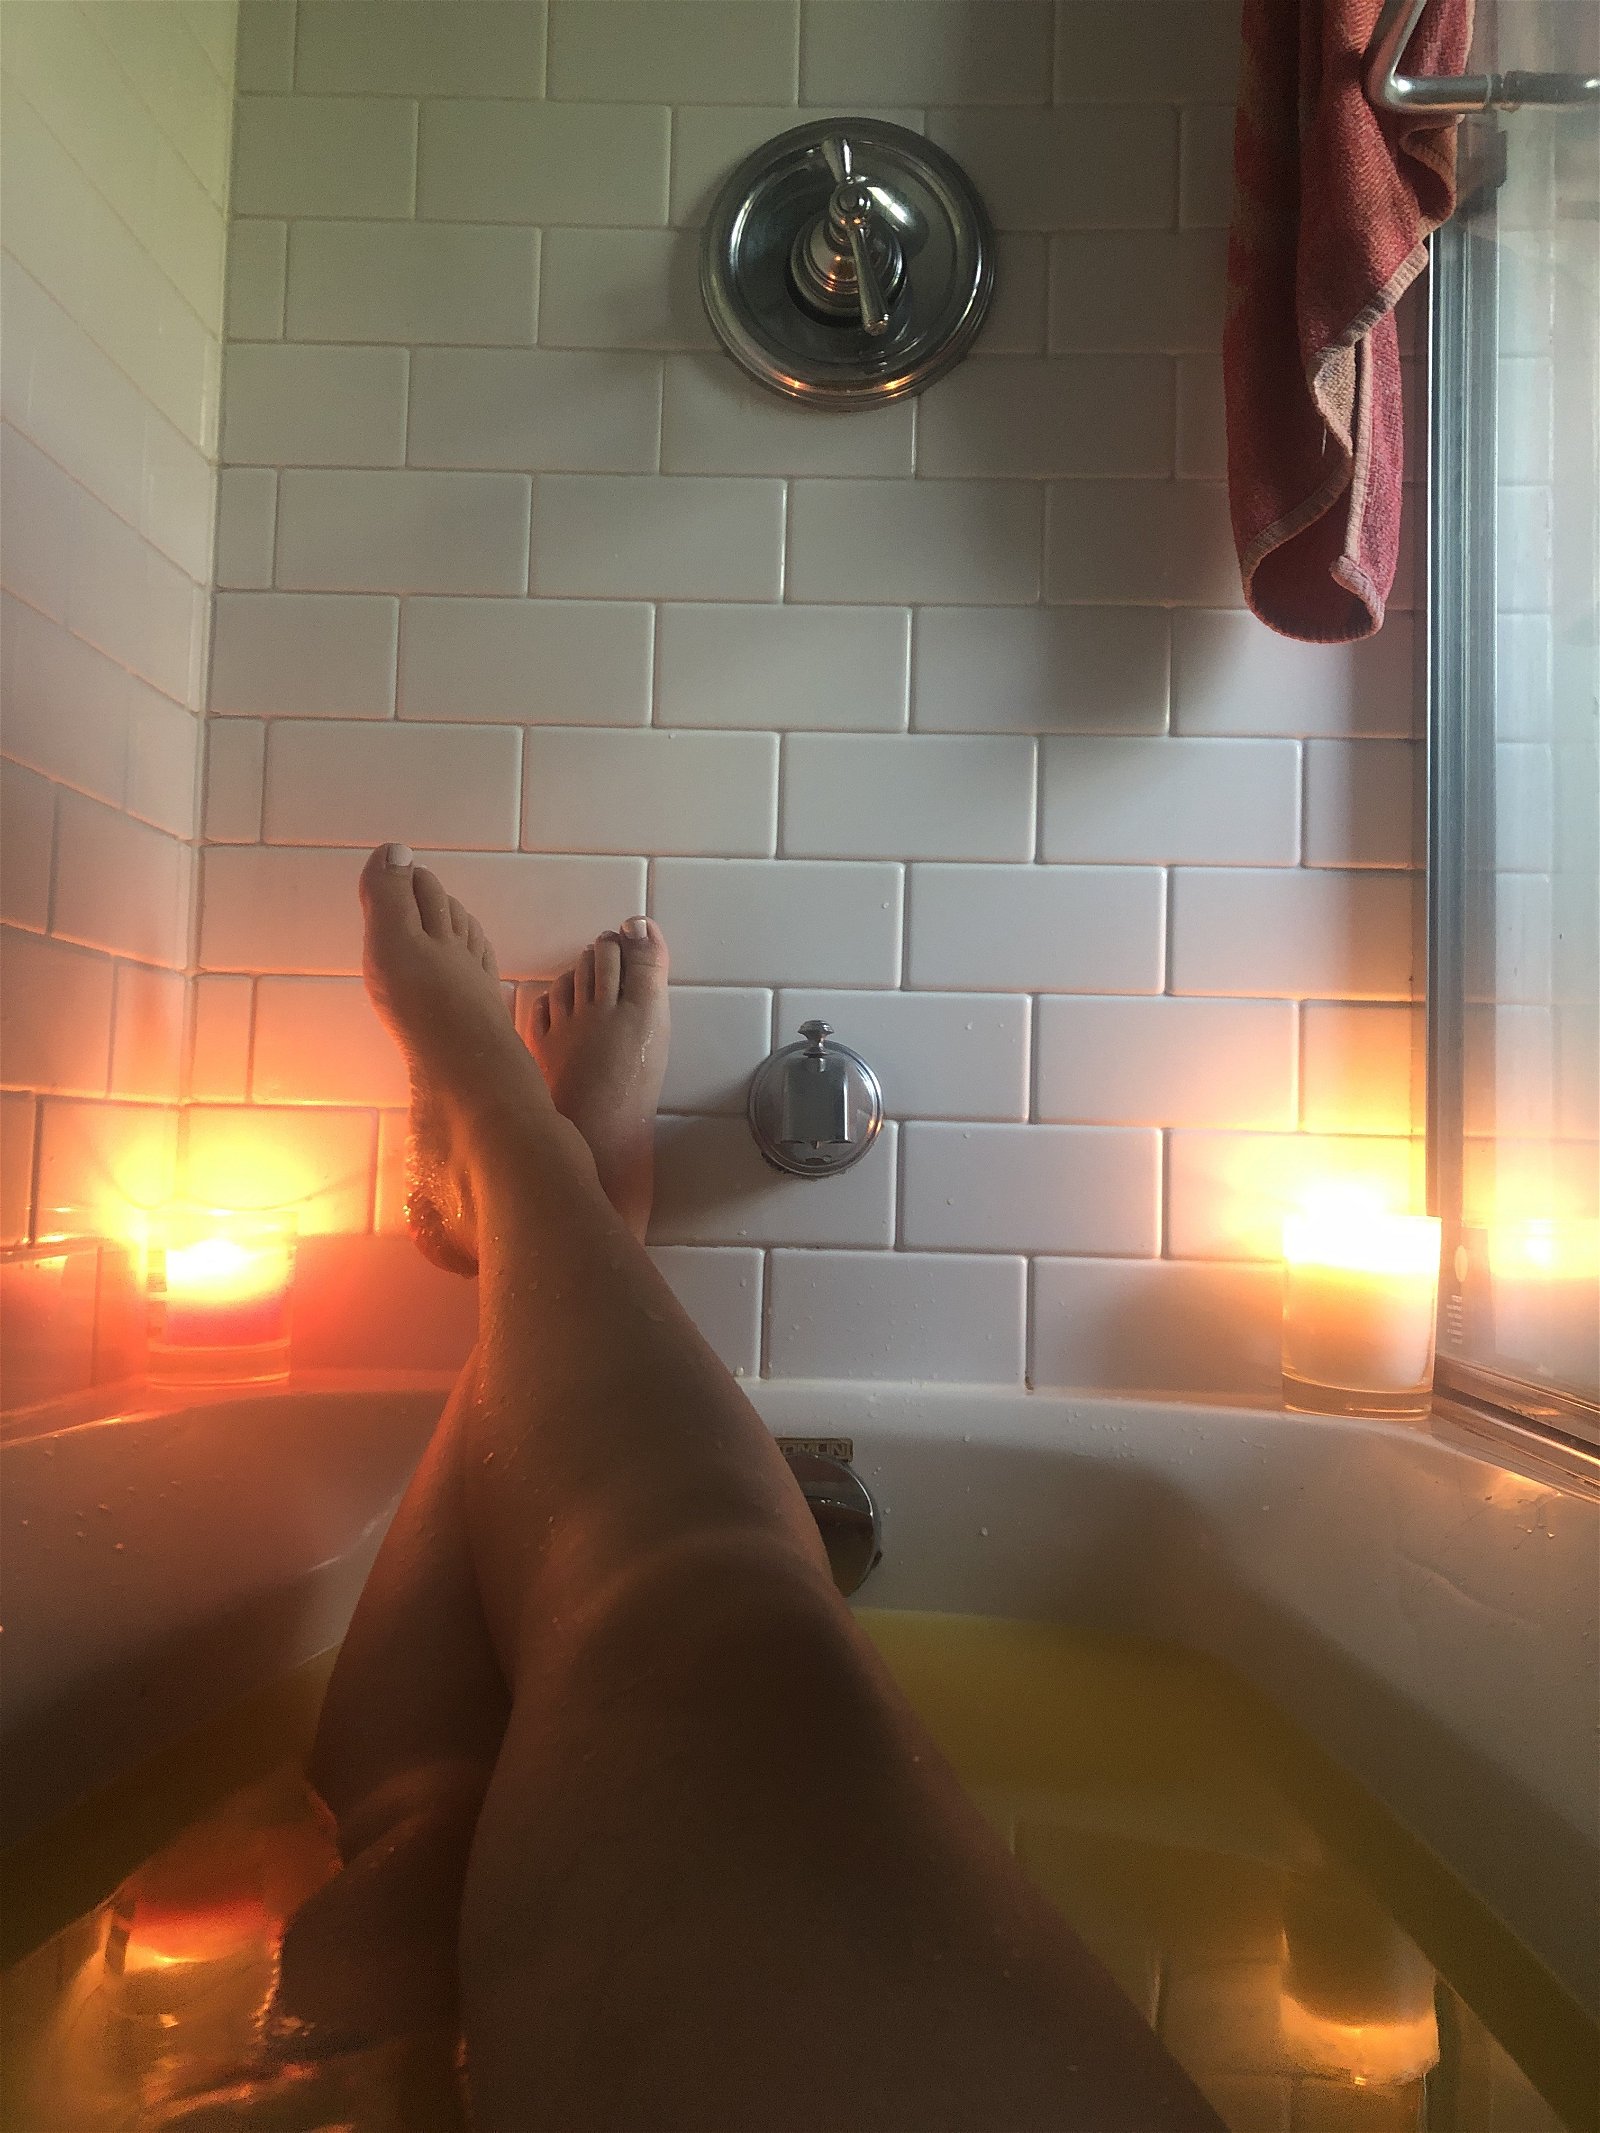 Watch the Photo by Bigtitsgirl with the username @Bigtitsgirl, posted on October 4, 2019. The post is about the topic Amateurs. and the text says 'its been awhile since I had a nice long soak in the tub. Although this bathbomb is surprisingly yellow'